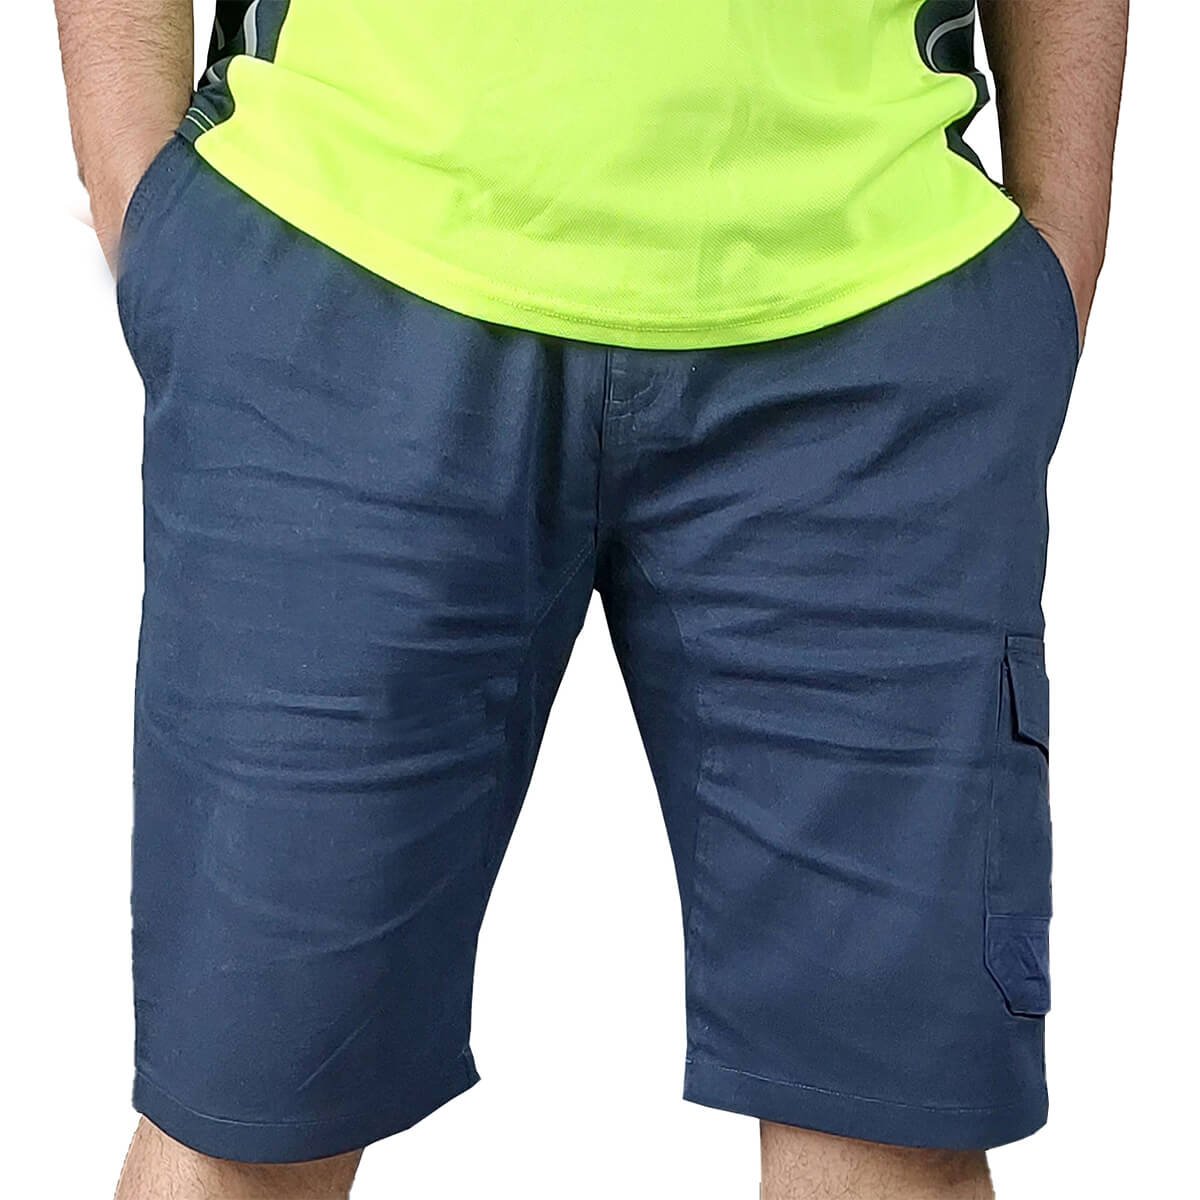 Work Shorts/Work Cargo Shorts- The Best & Cheapest In 2022 - ABC